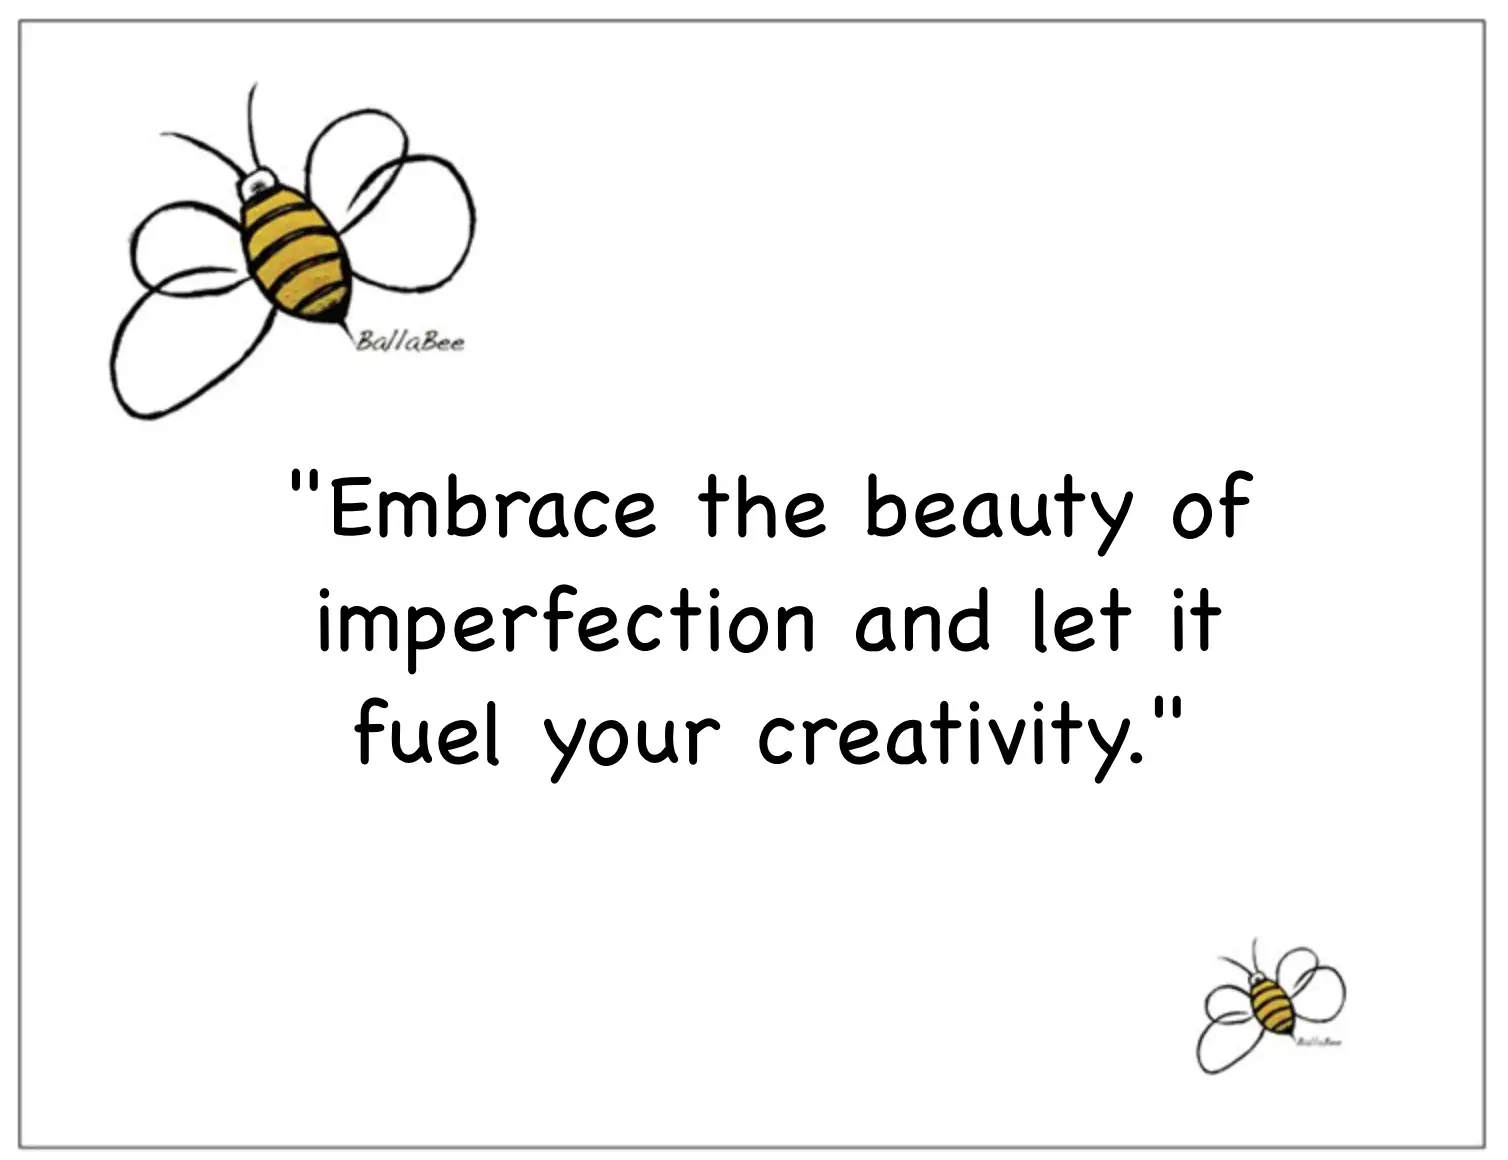 Embrace the beauty of imperfection and let it fuel your creativity